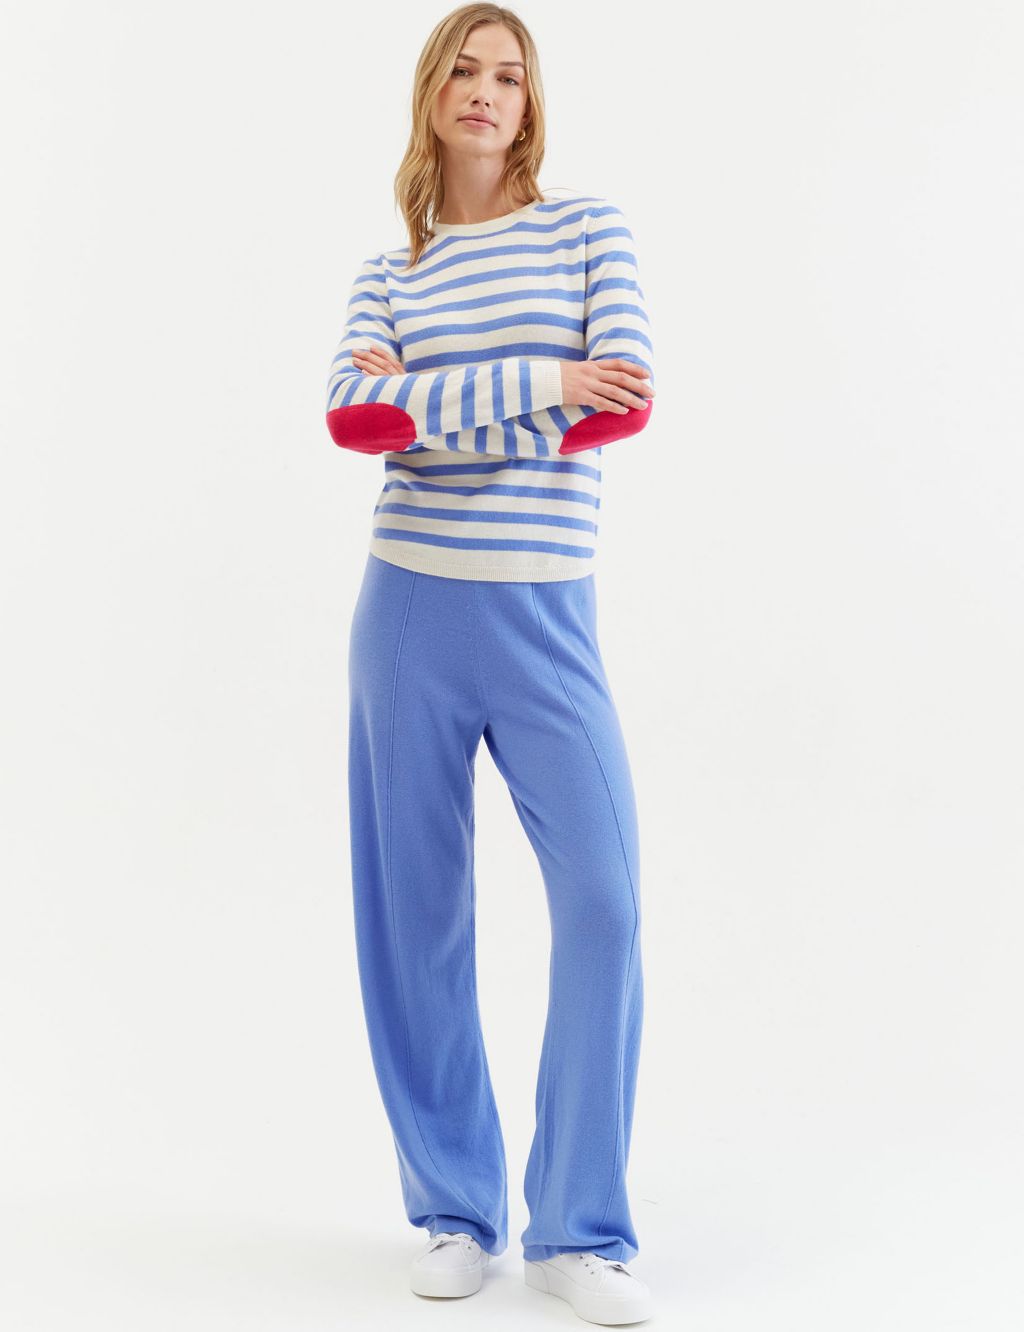 Wool Rich Striped Sweatshirt with Cashmere image 5